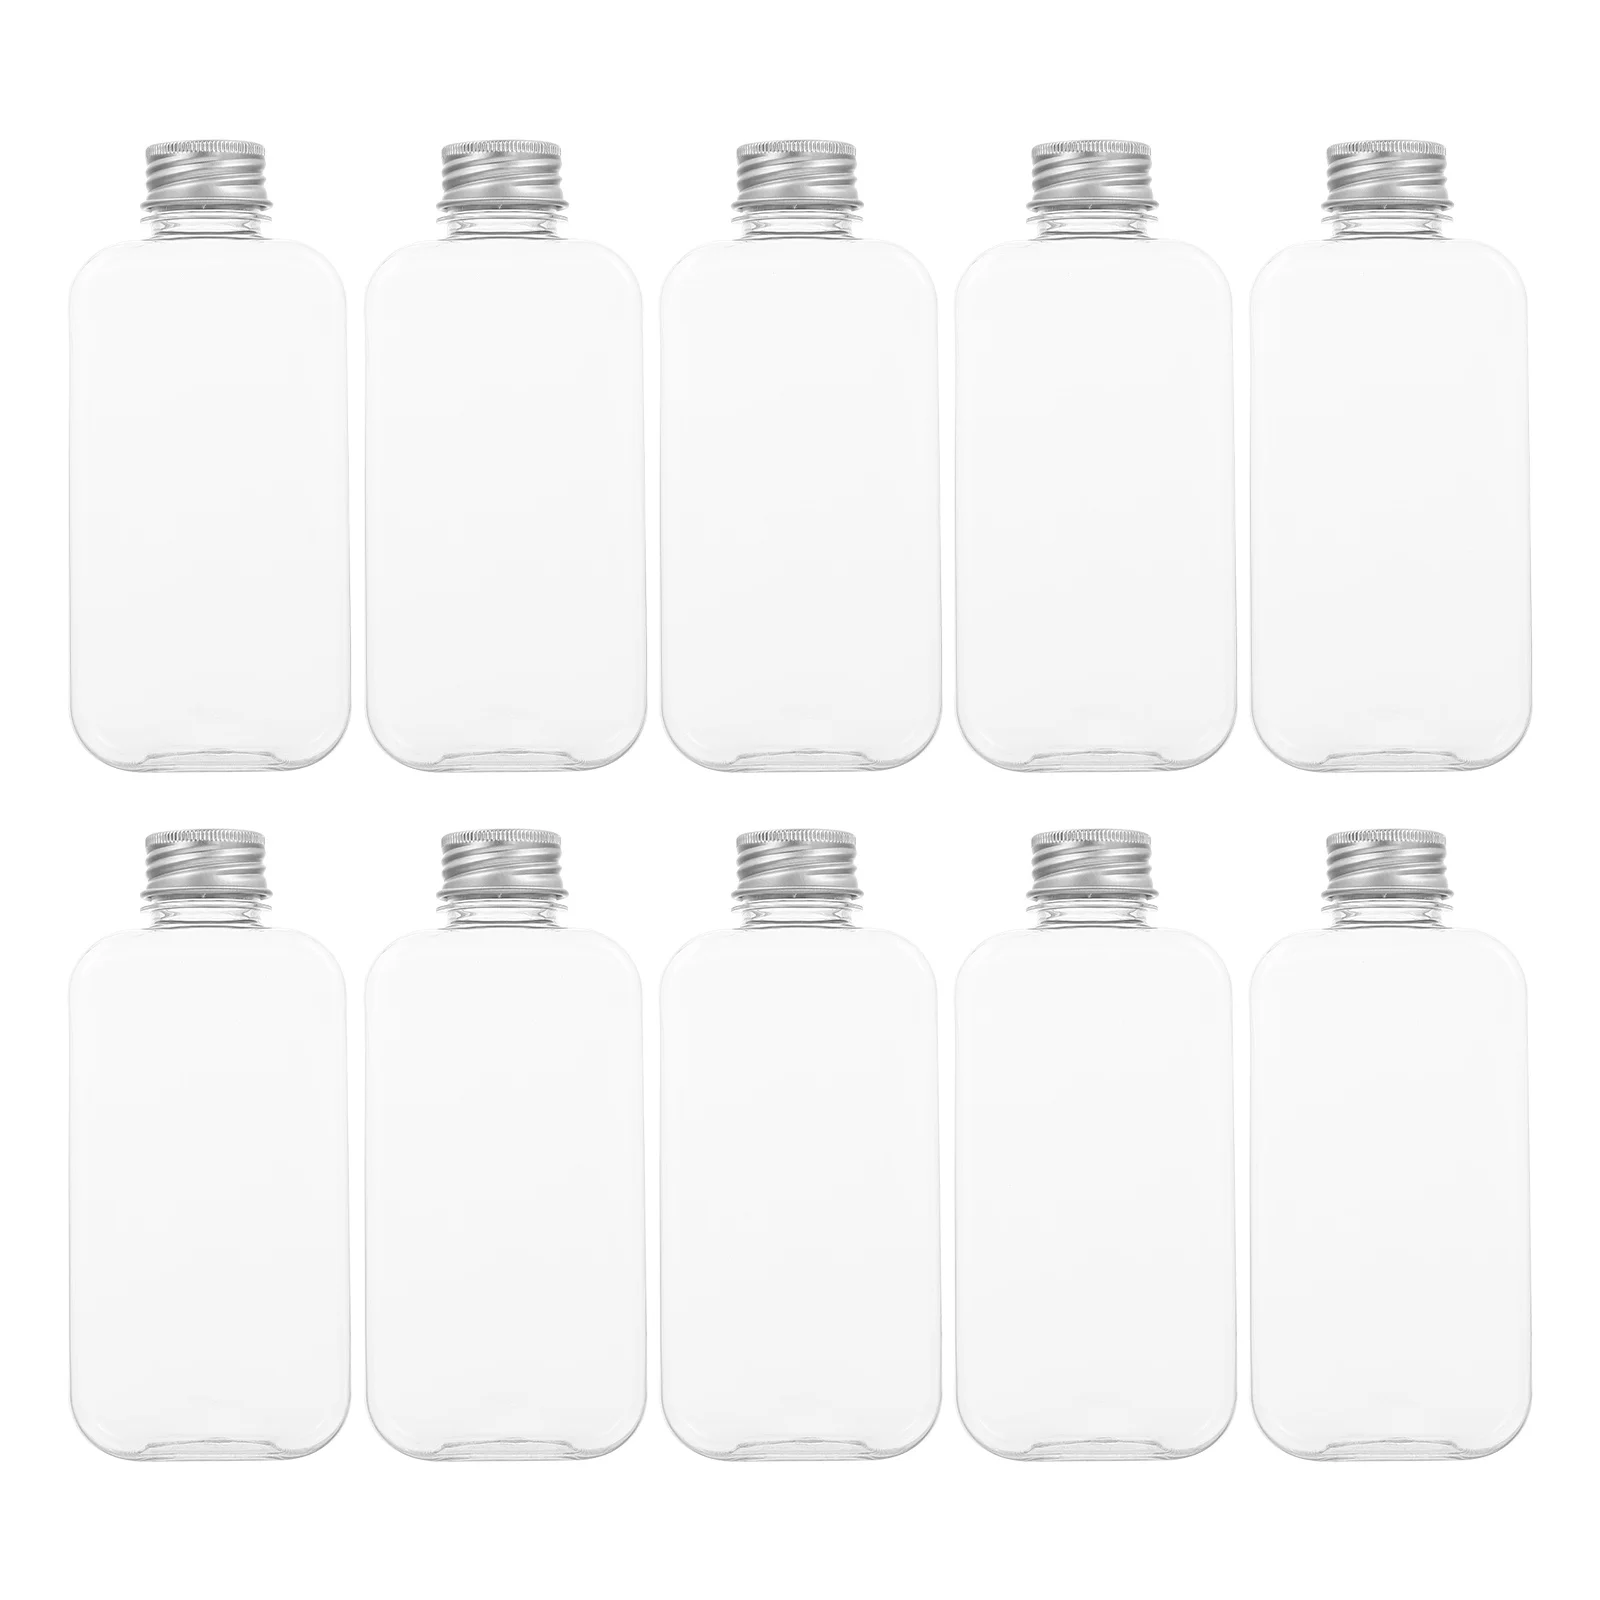 

10Pcs Drinks Bottles 350ml Empty Bottles Reusable Clear Disposable Bottles Beverage Bottles Containers Jars with Screw- on Lids